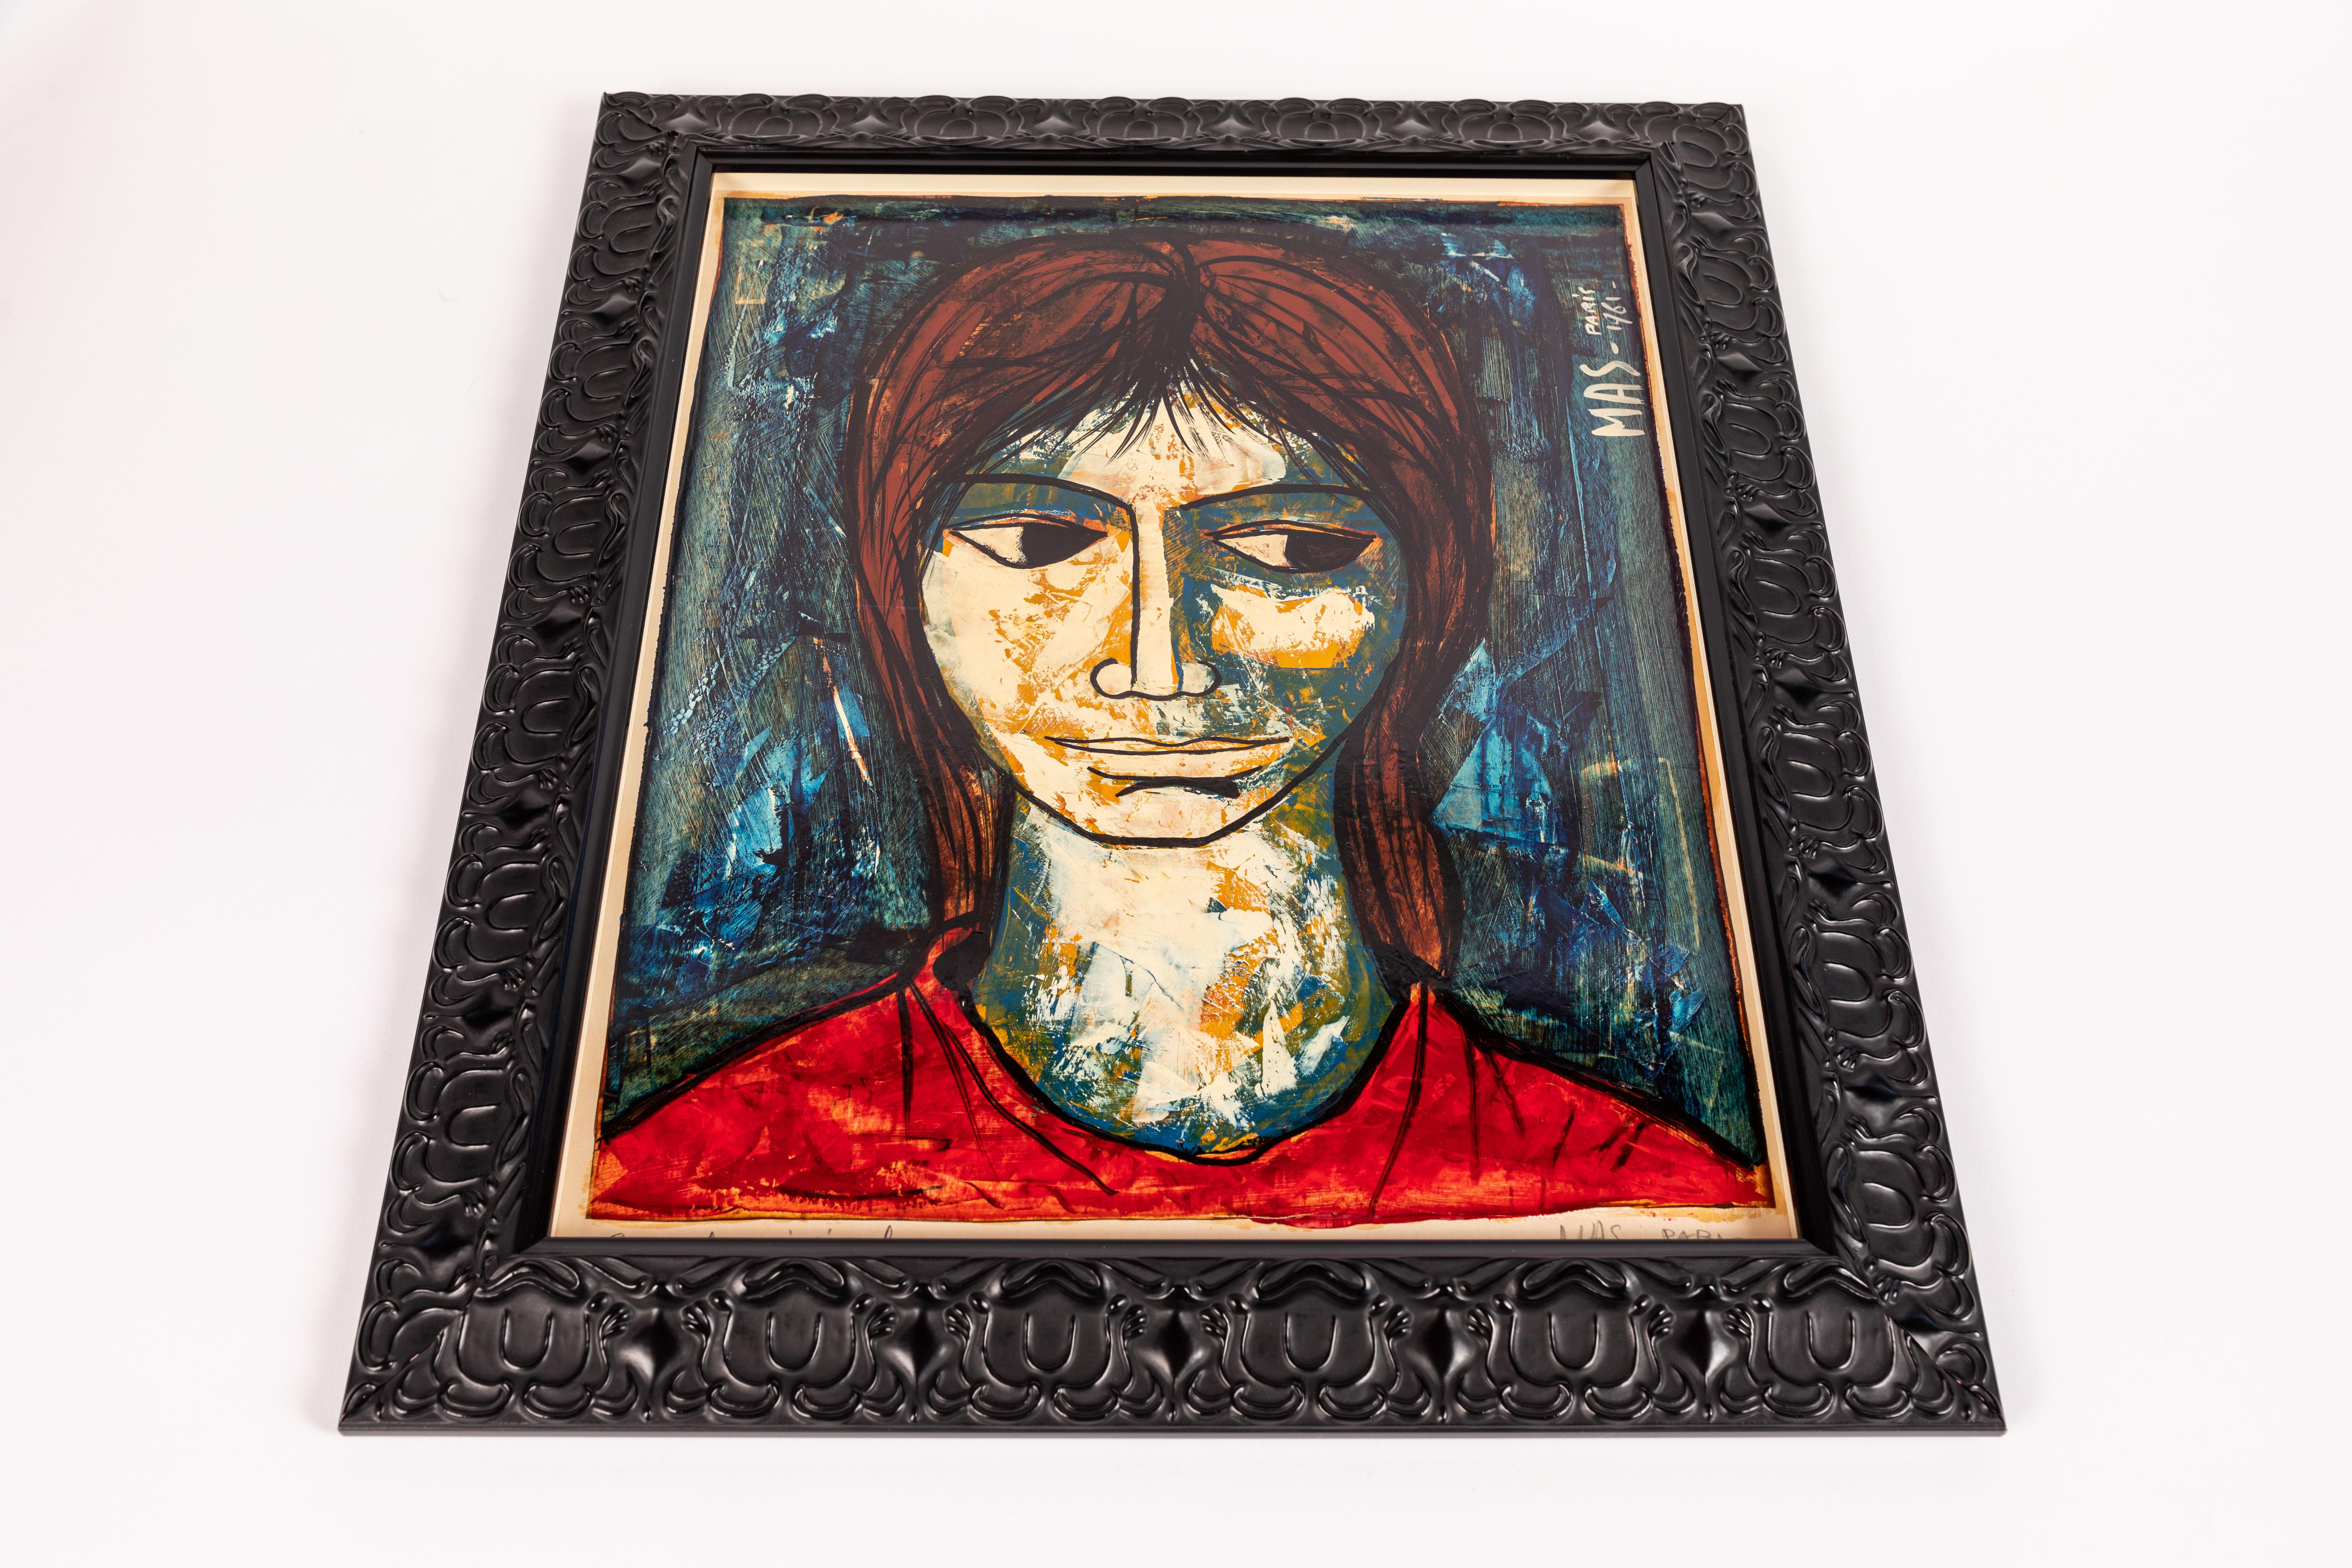 Original Varnished Gouache on paper painting by French Artist Pierre Mas dated Paris, 1961 (born 1933). 

Newly framed with a decorative matte black frame and finished with museum glass.